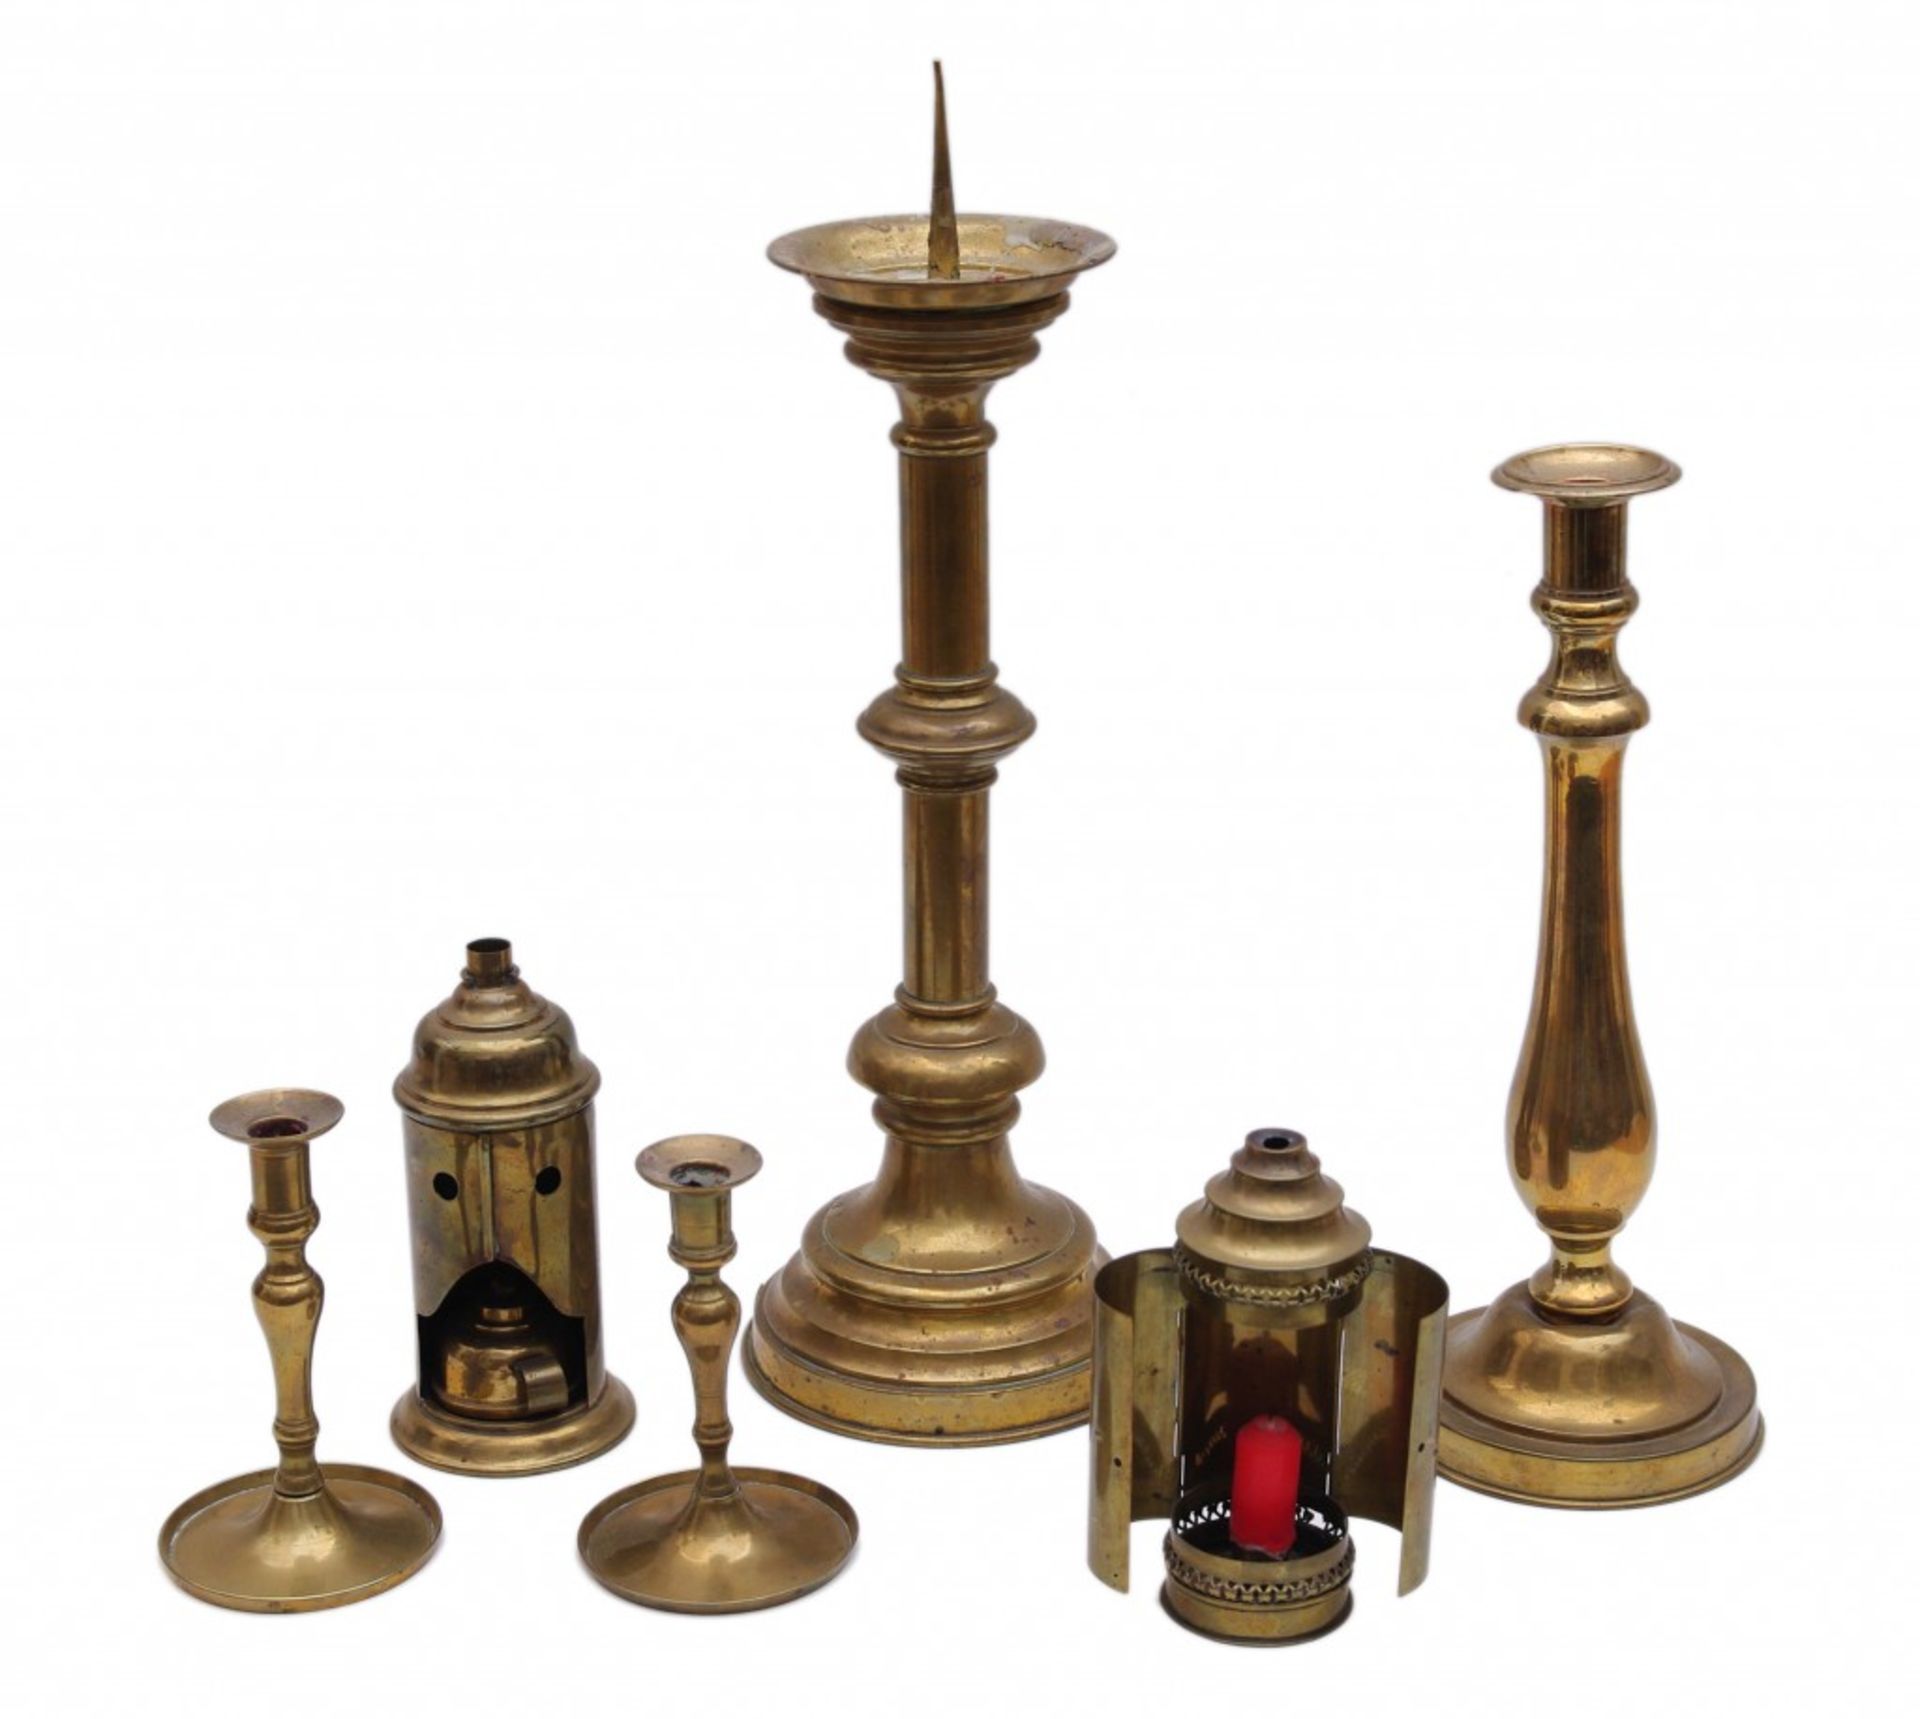 Antique and Vintage Candlesticks and Lamps